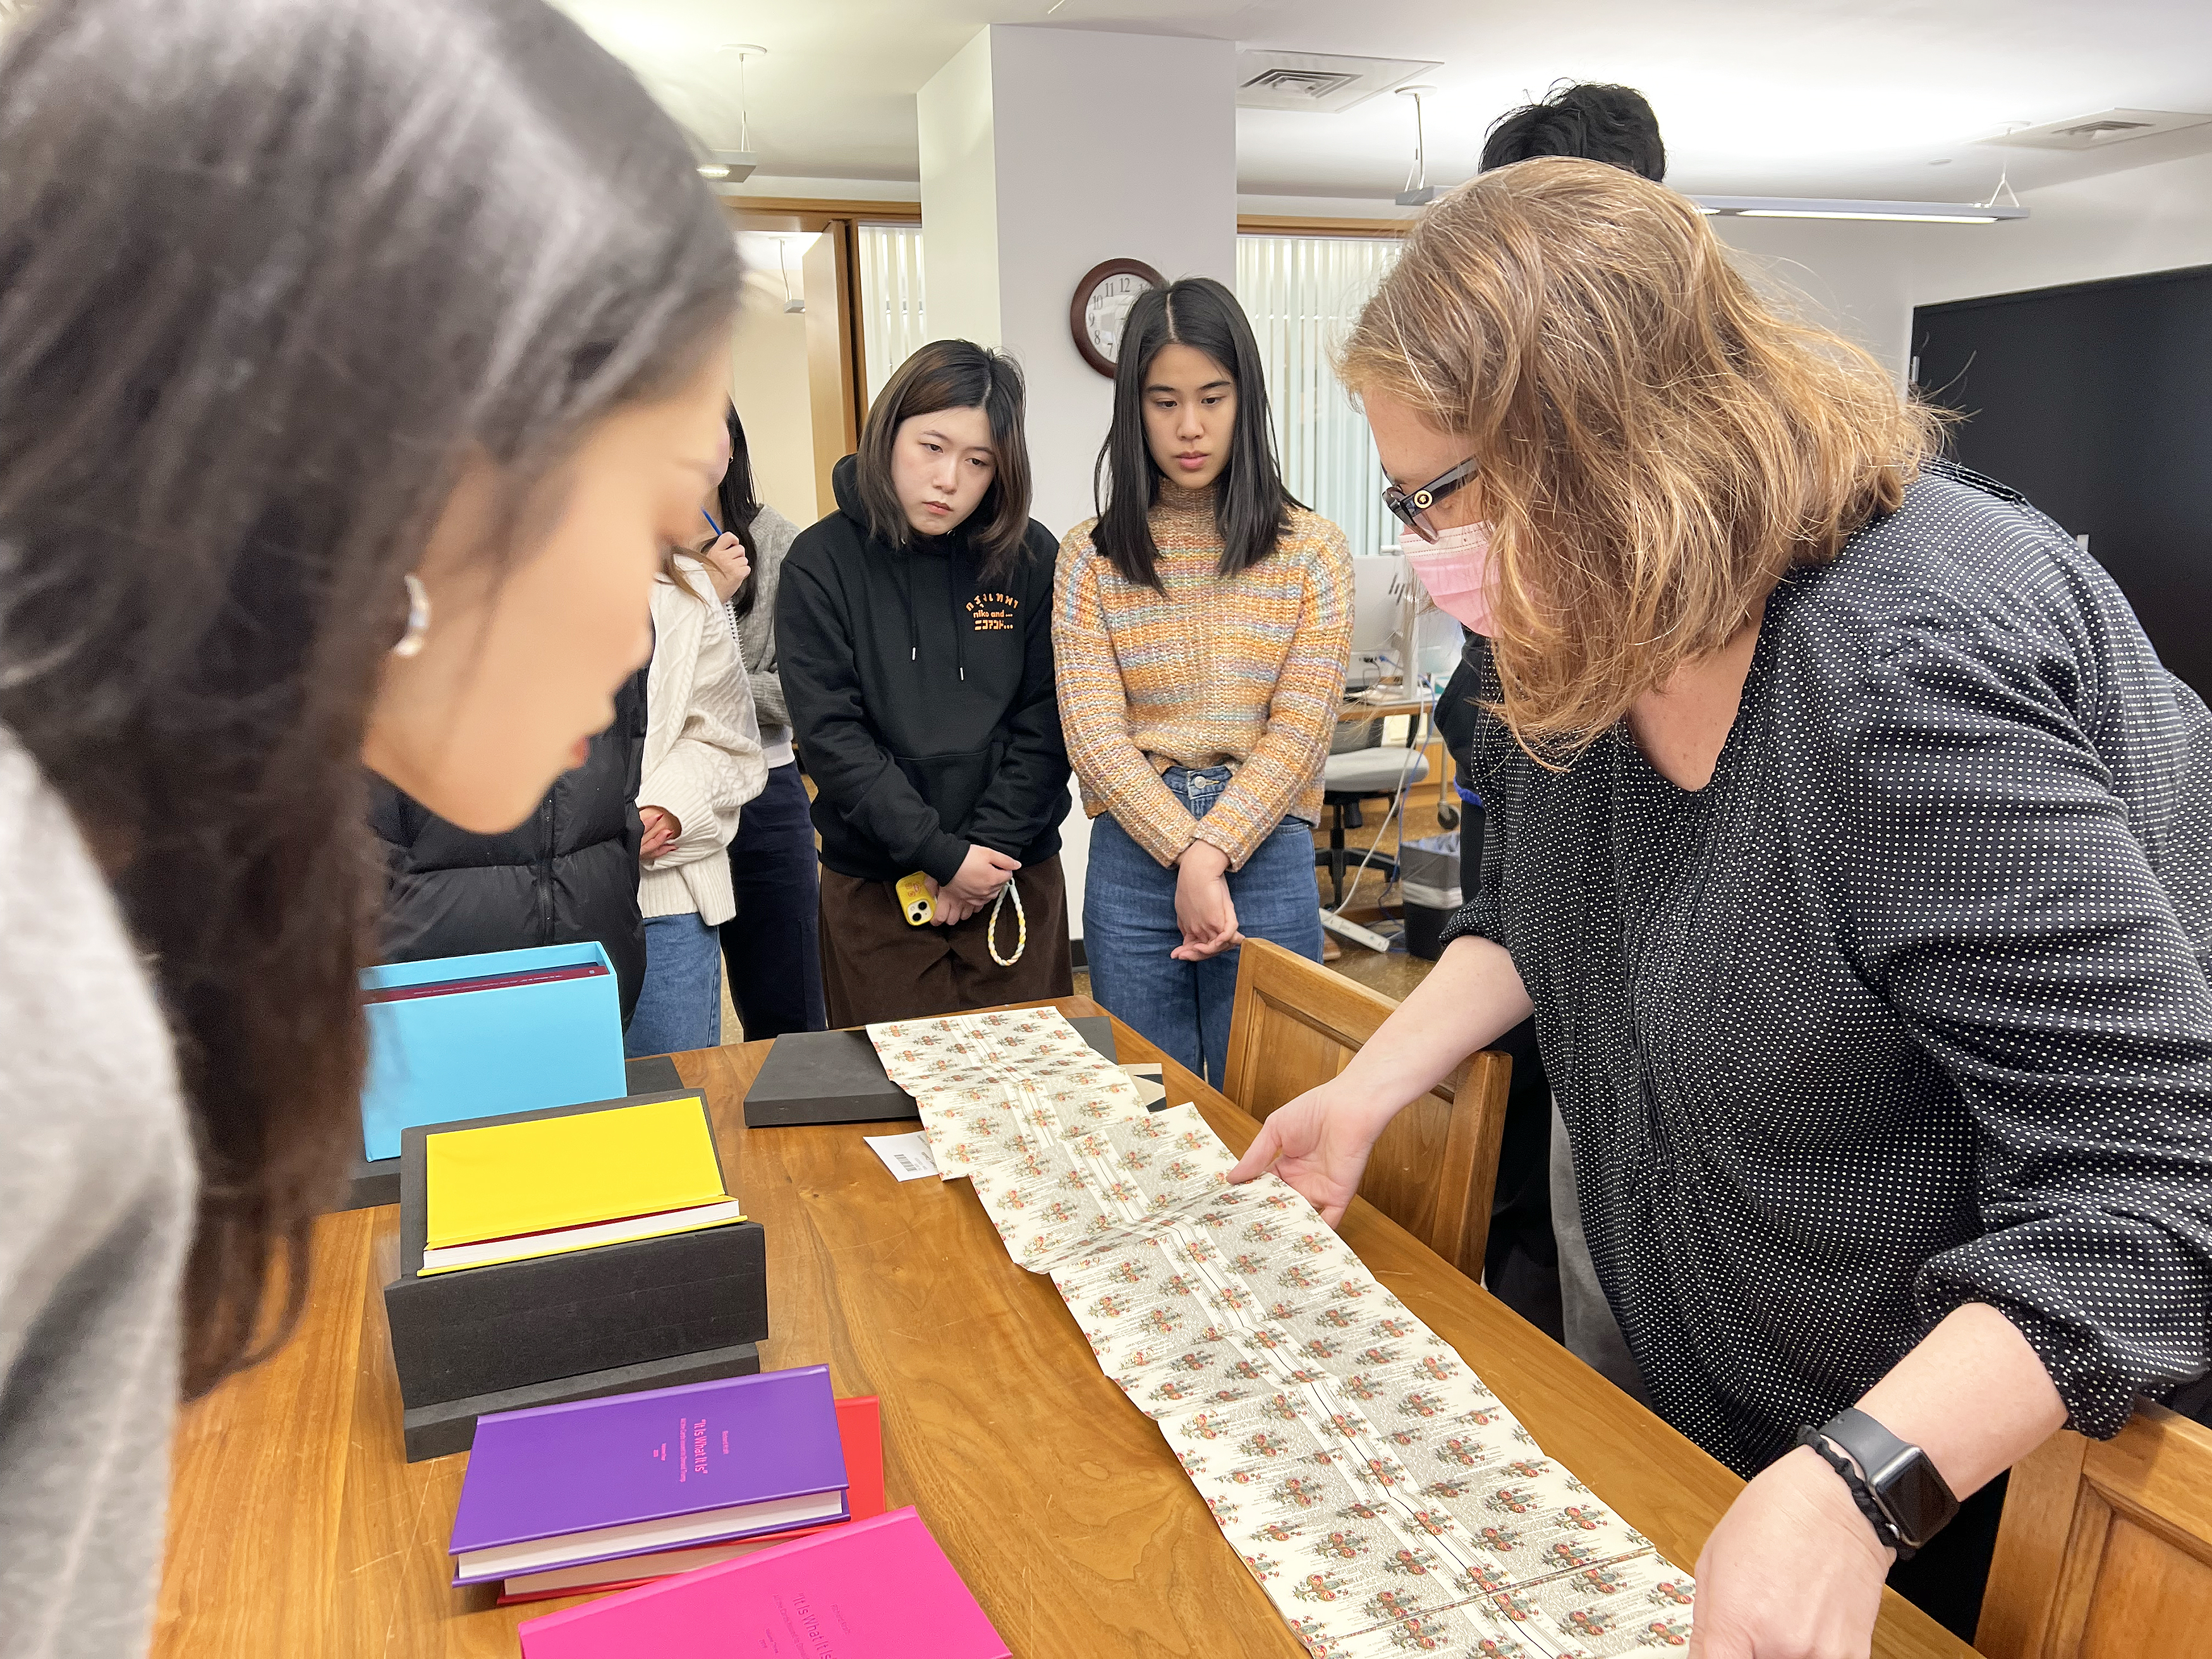 Special Collections Librarian Claudia Covert shows the class a piece from the 1970s